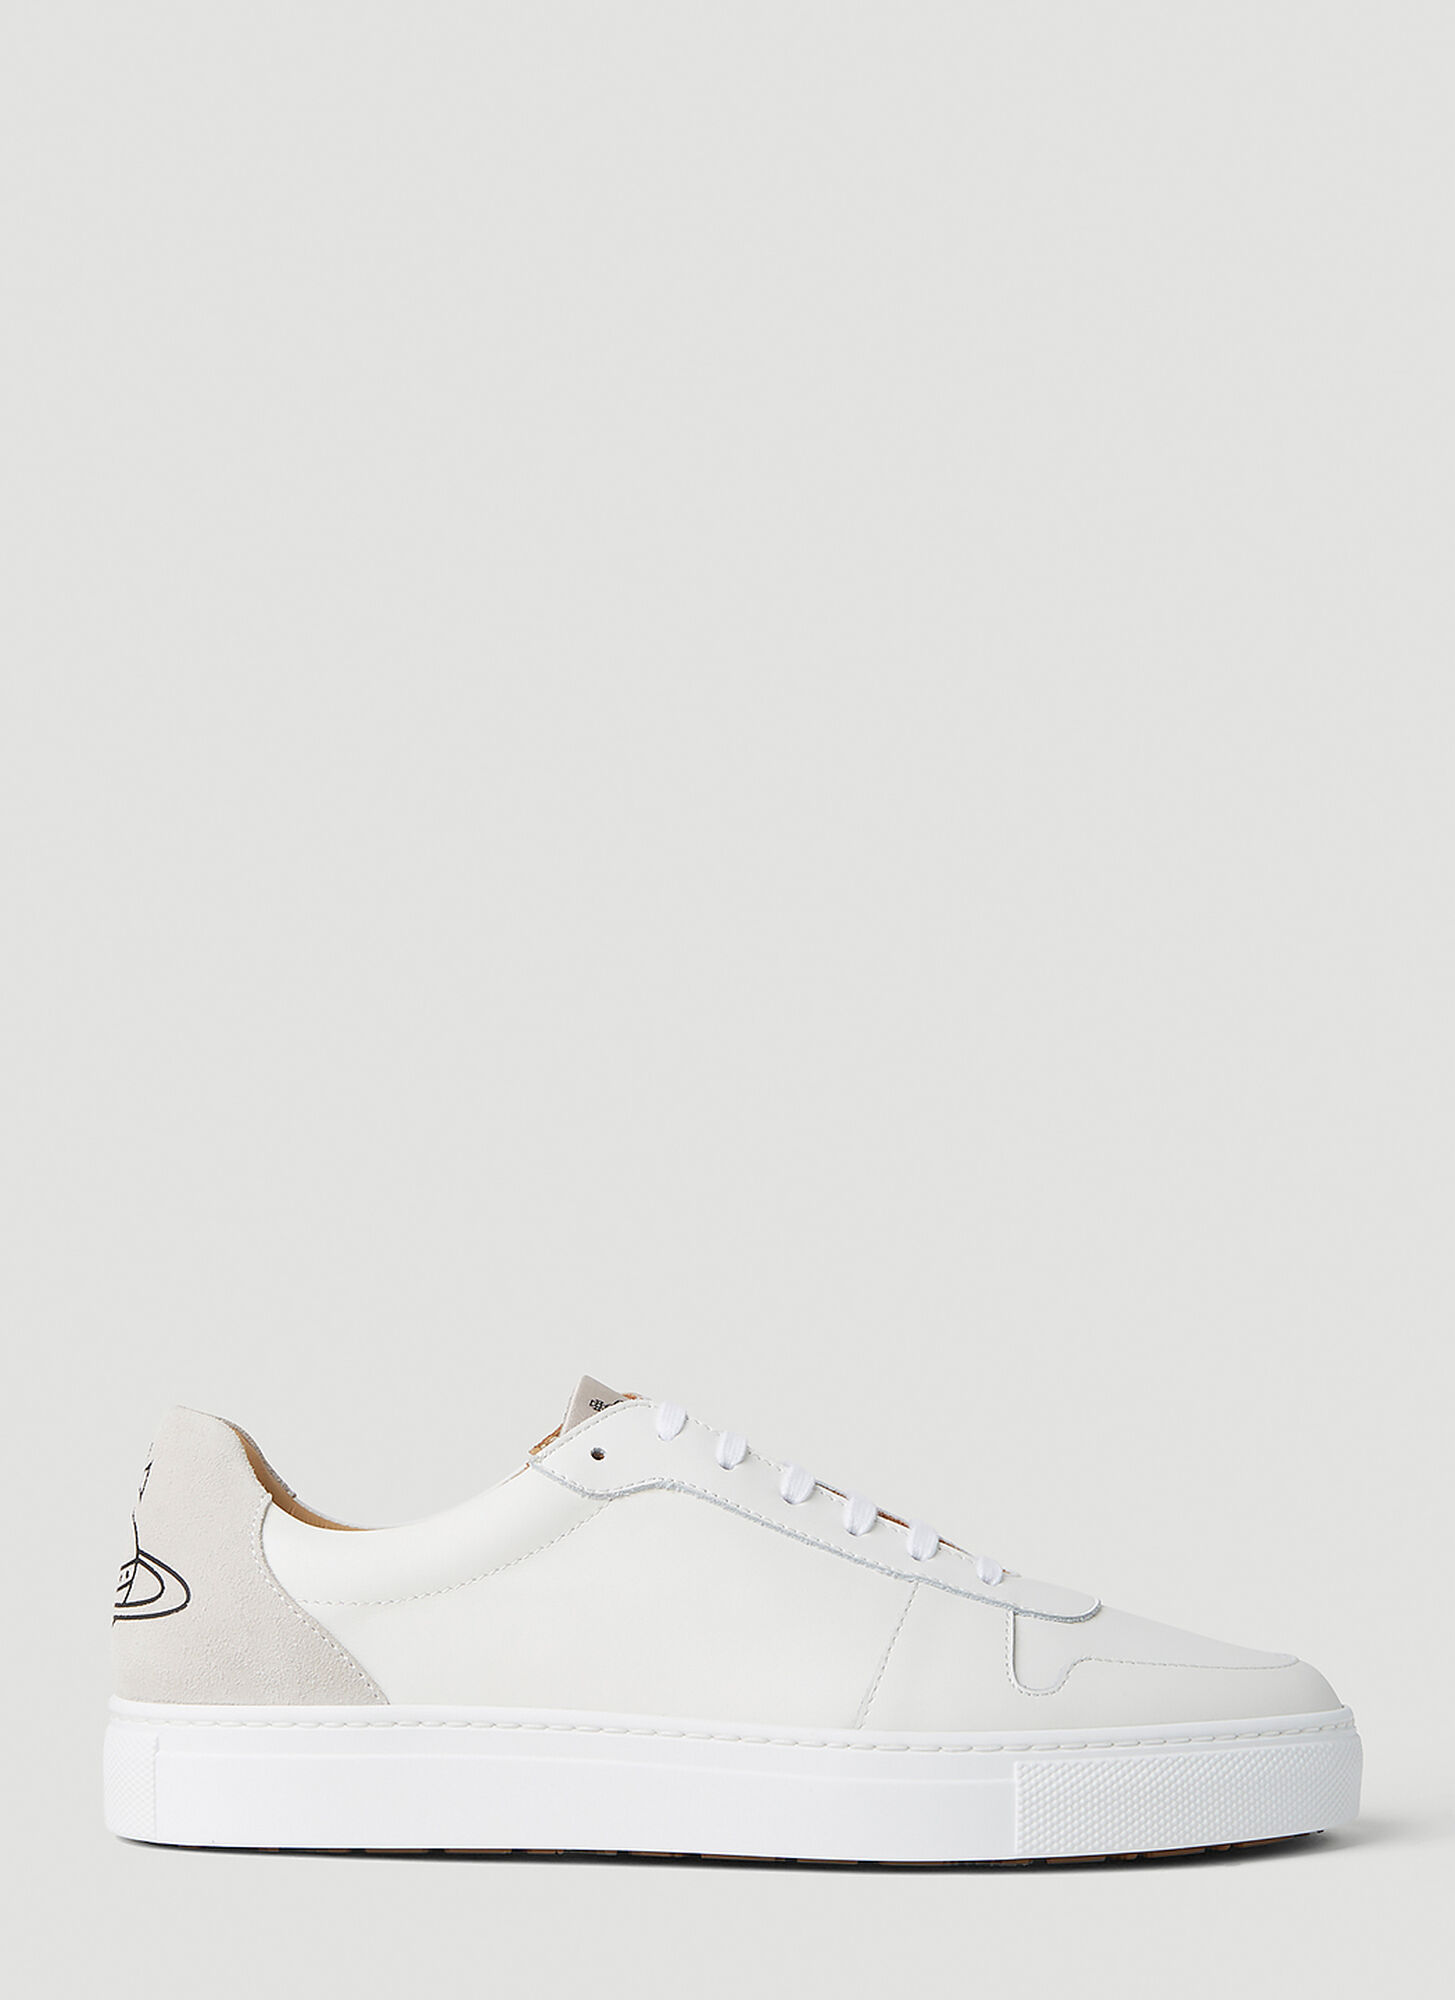 Vivienne Westwood Classic Orb Sneakers In White